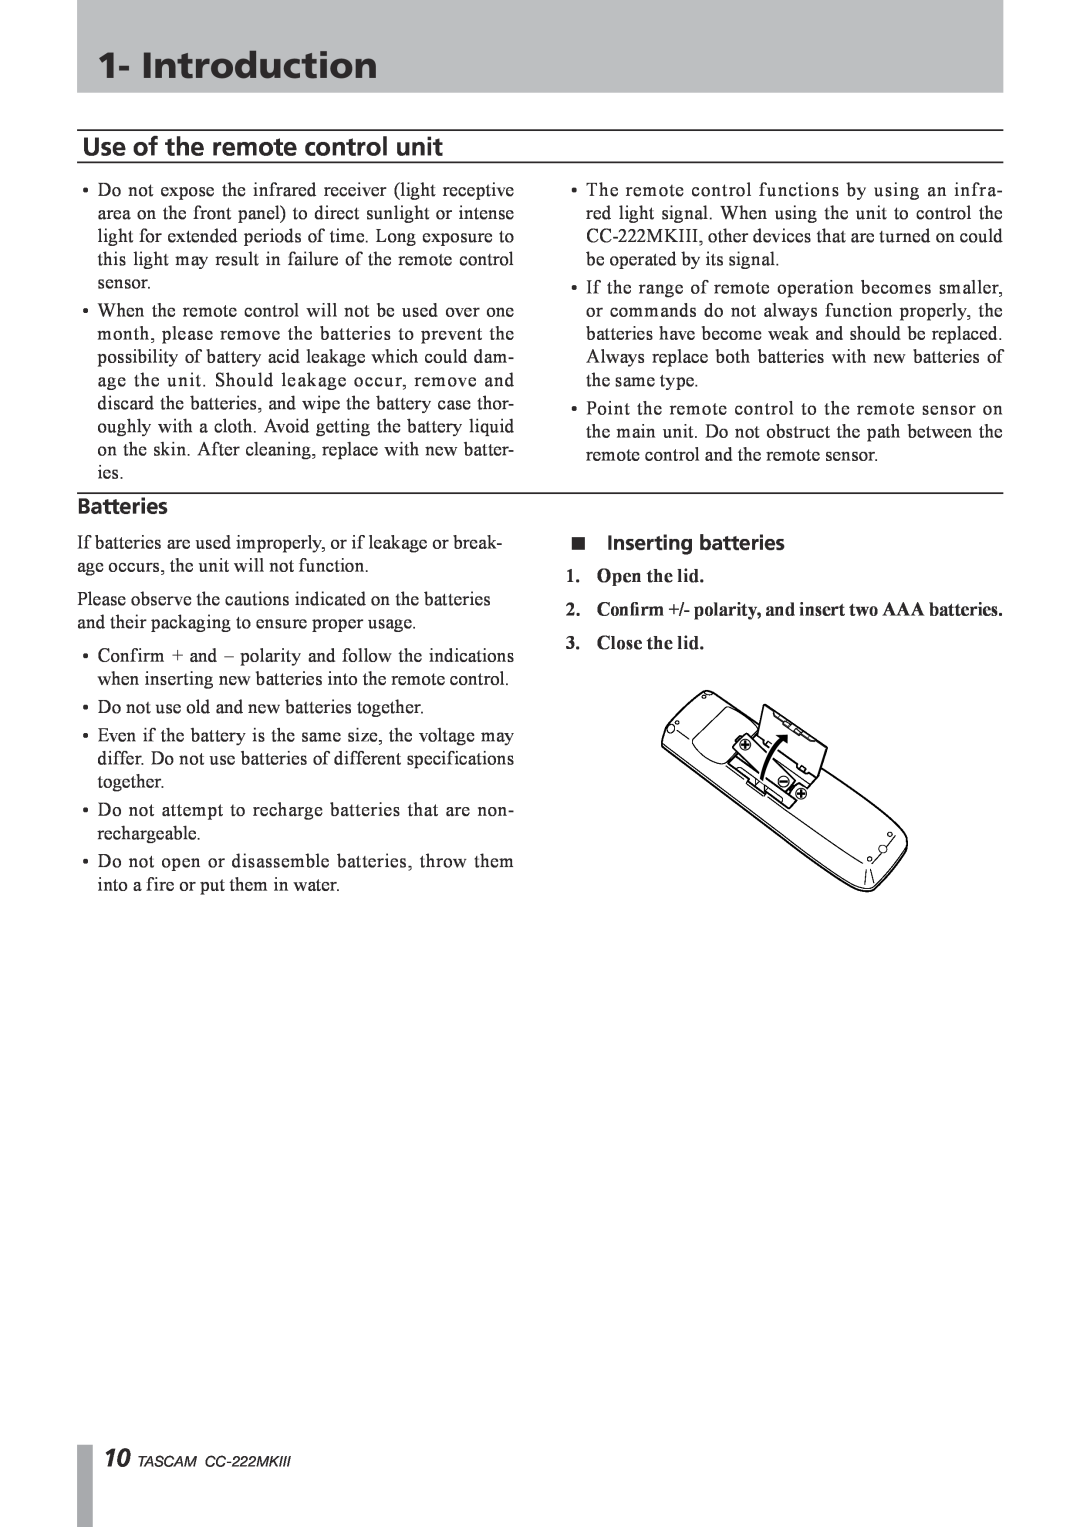 Tascam CC-222MK owner manual Use of the remote control unit, Introduction, Batteries, ªInserting batteries 